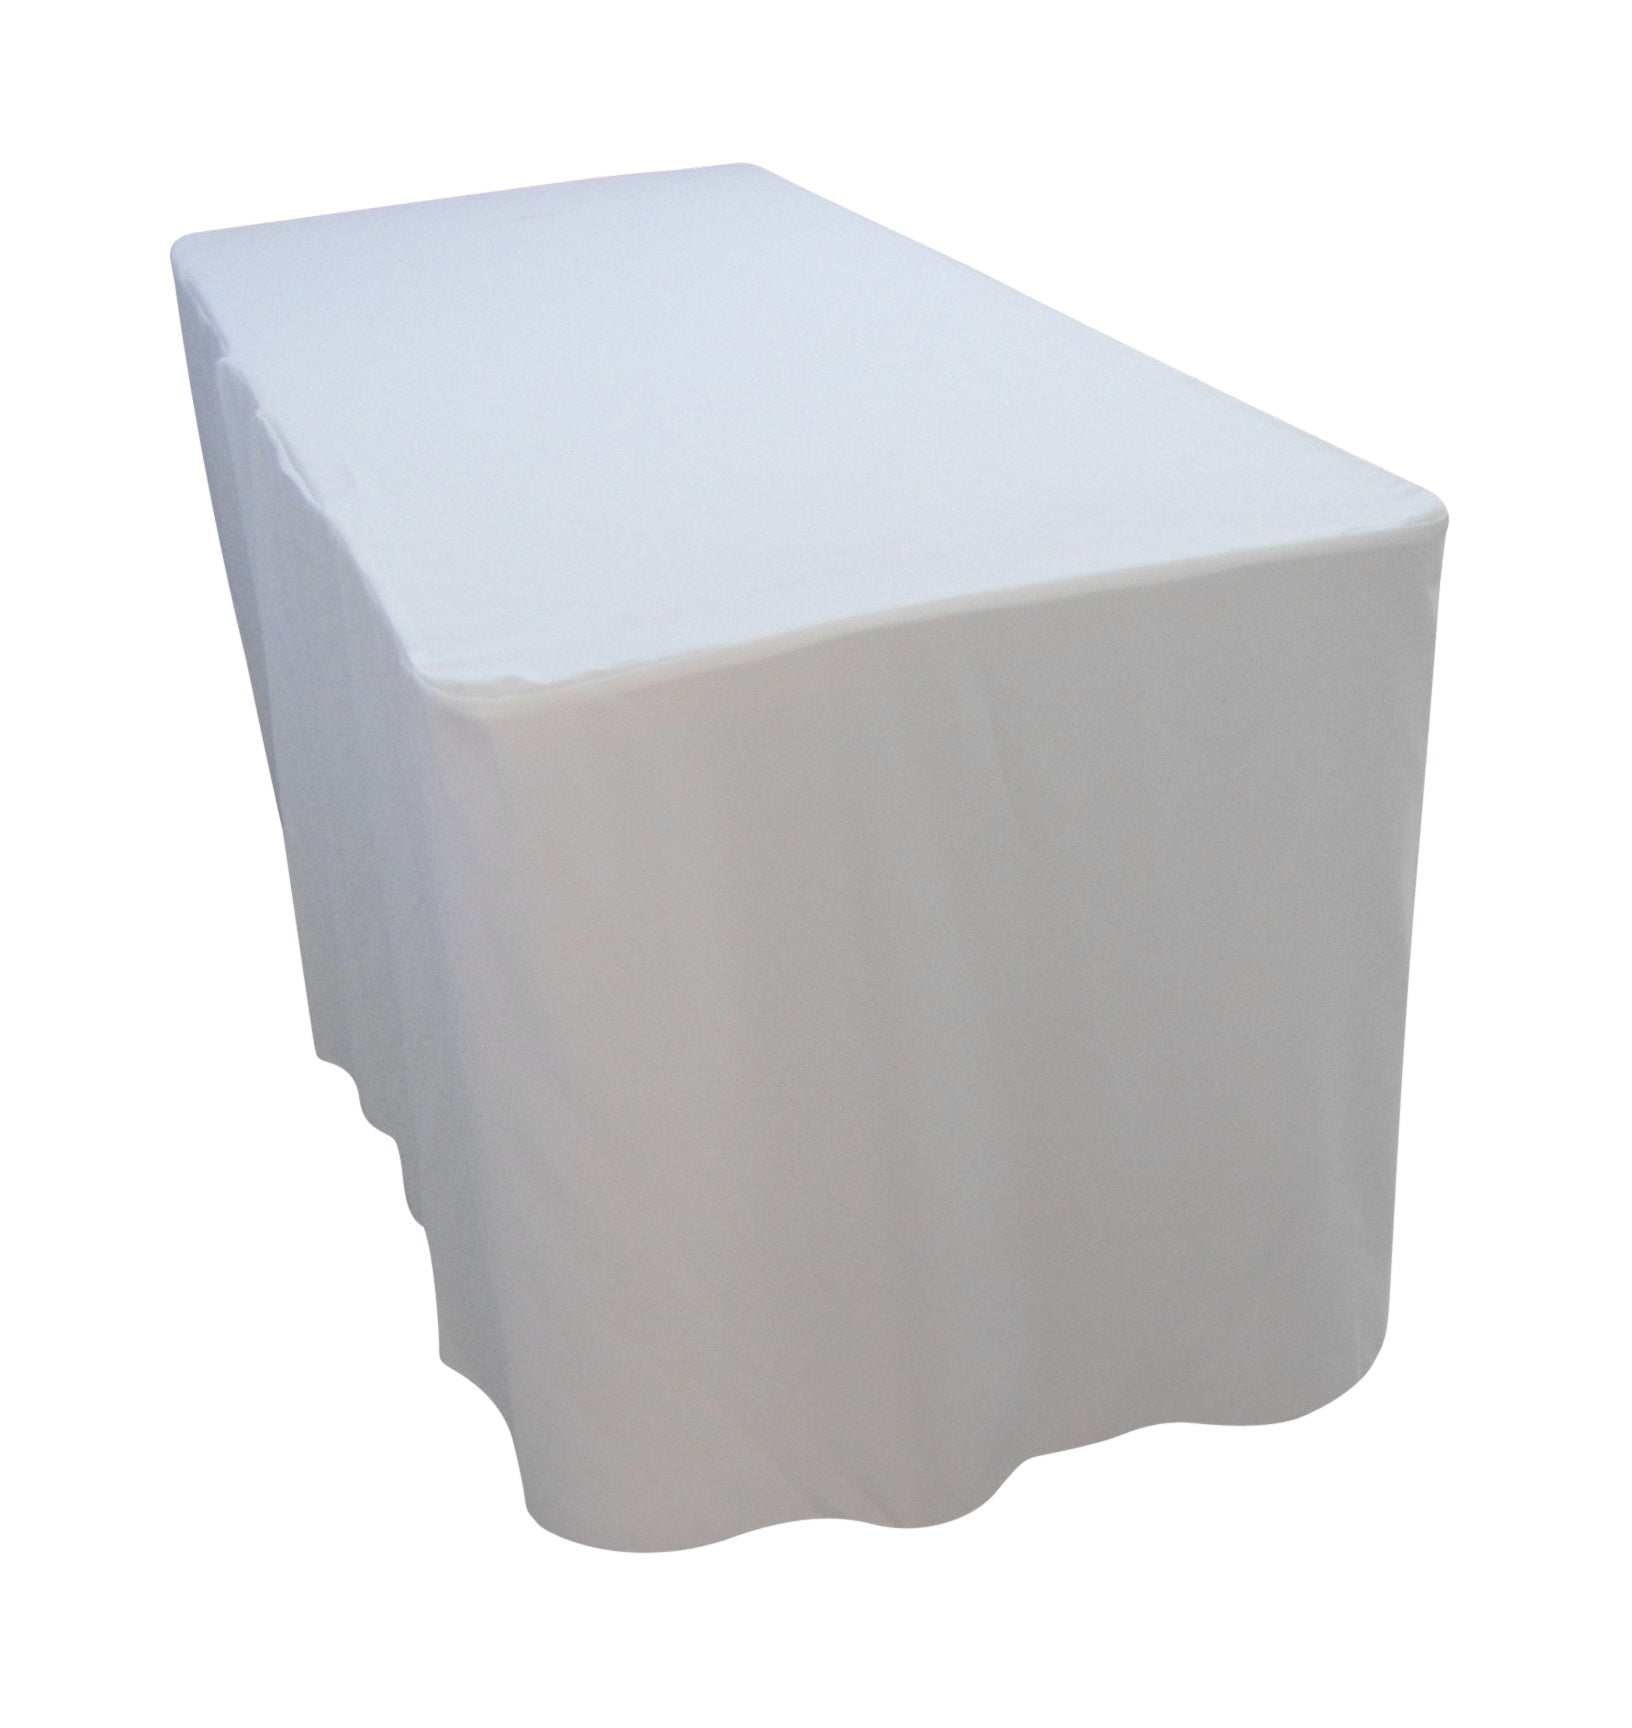 6 Foot White Table Cloth Trestle Cover